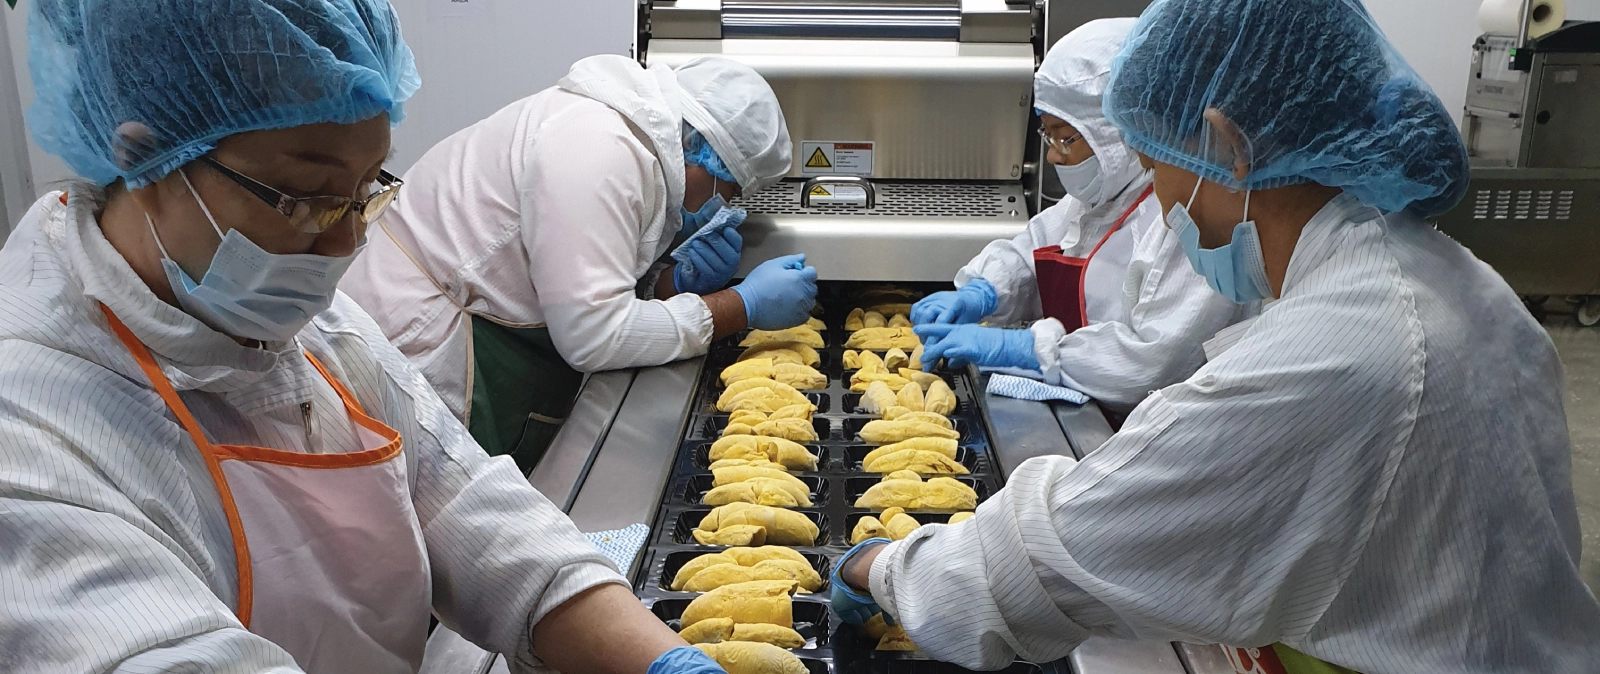 Durian manufacturing & processing